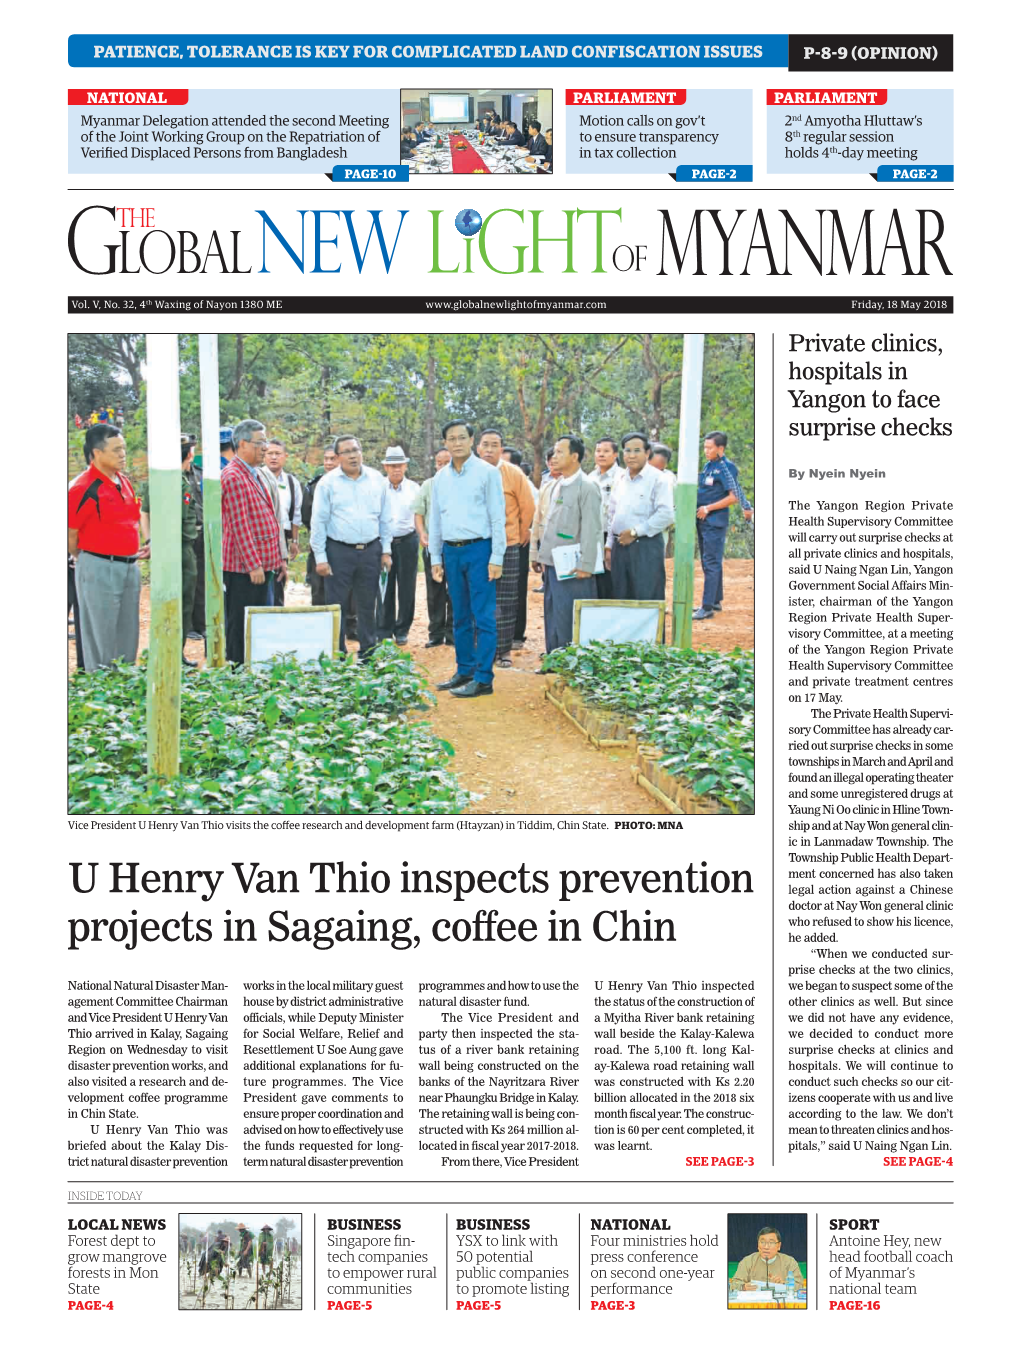 U Henry Van Thio Inspects Prevention Projects in Sagaing, Coffee in Chin